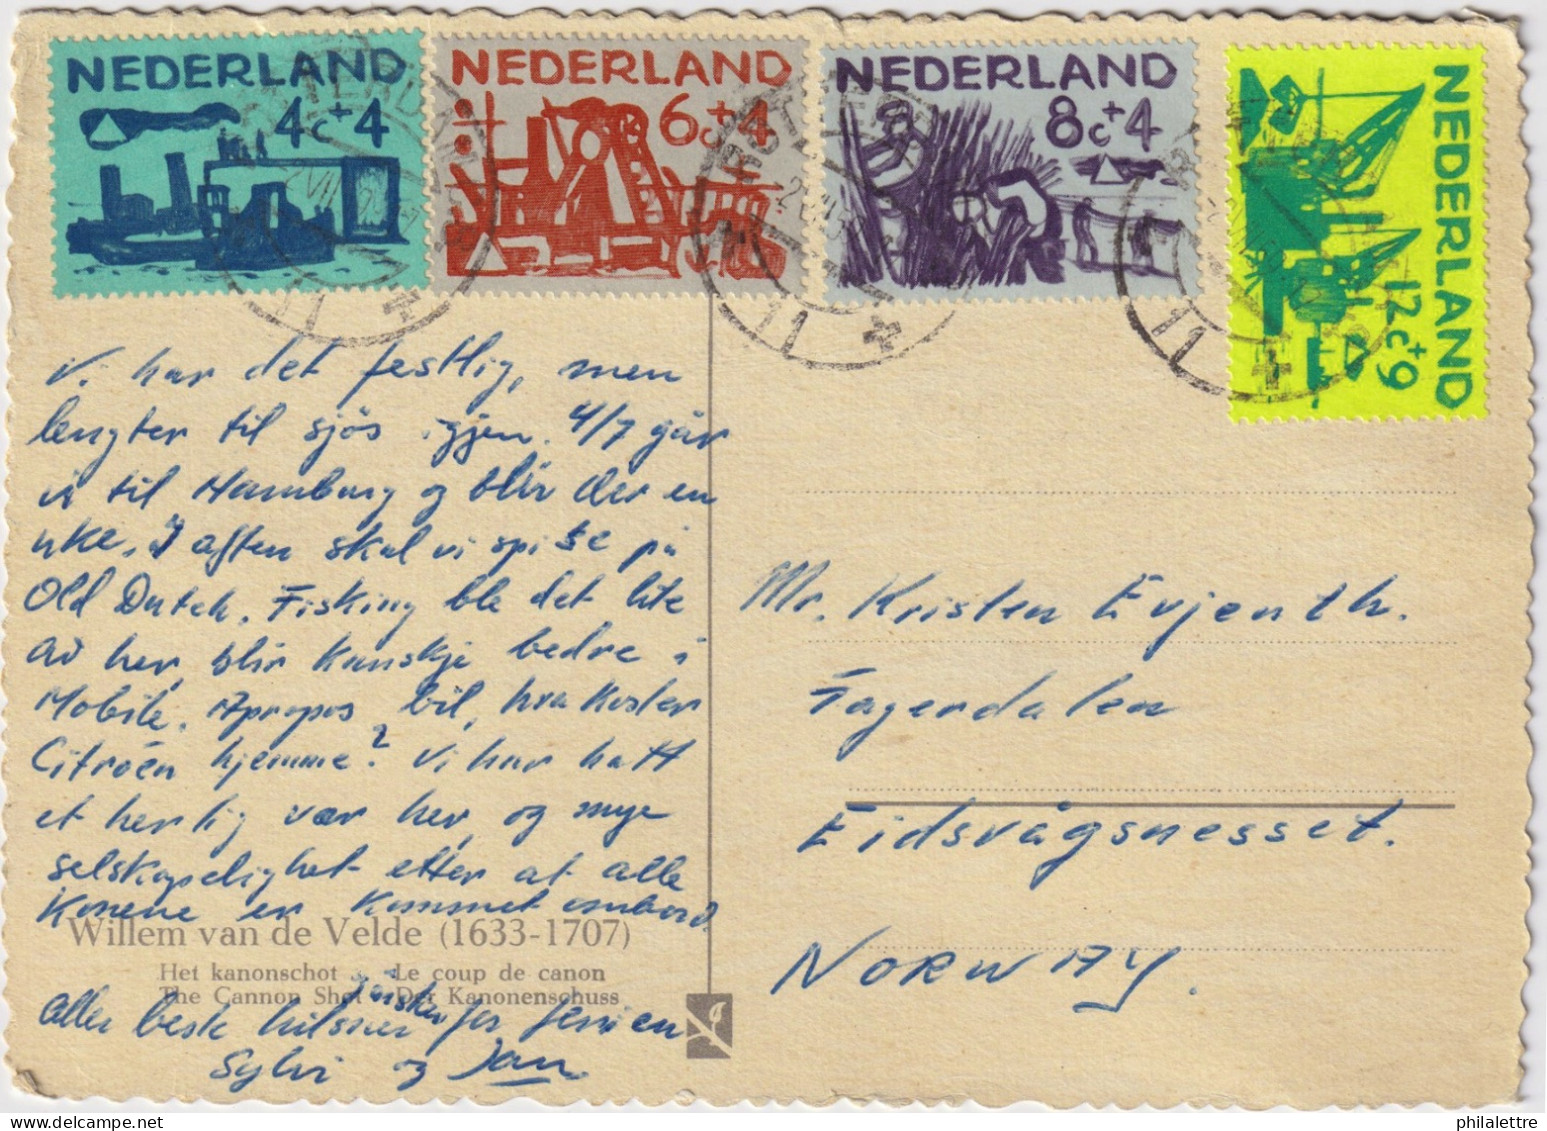 PAYS-BAS / THE NETHERLANDS - 1959 Mi.730, 731, 732 & 733 On Card From ROTTERDAM To EIDSVAG, MESSET, Norway - Covers & Documents